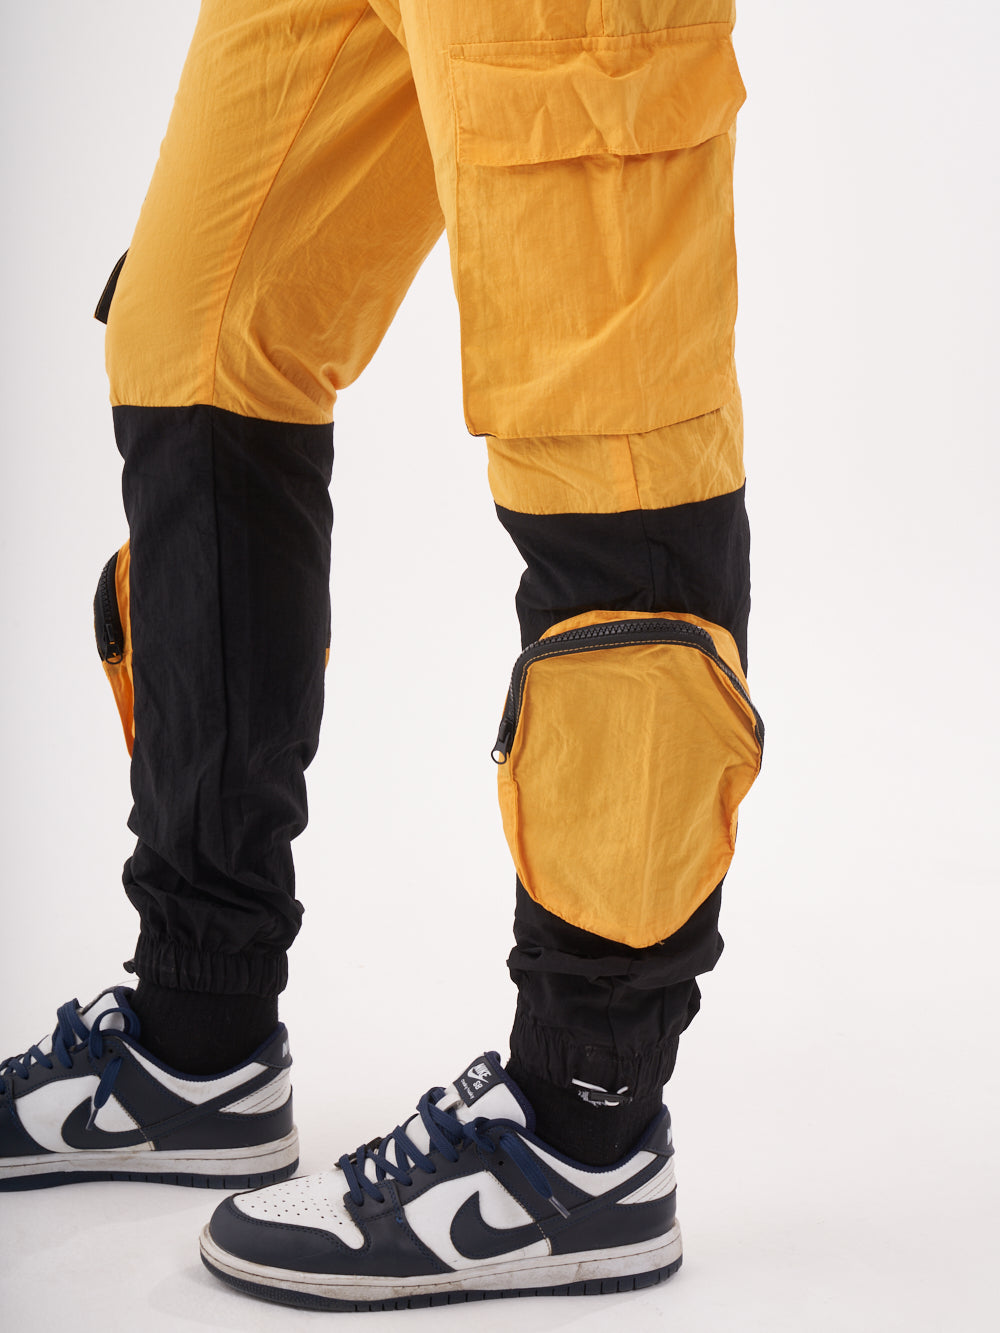 The back of a man wearing RENEGADE | YELLOW cargo pants.